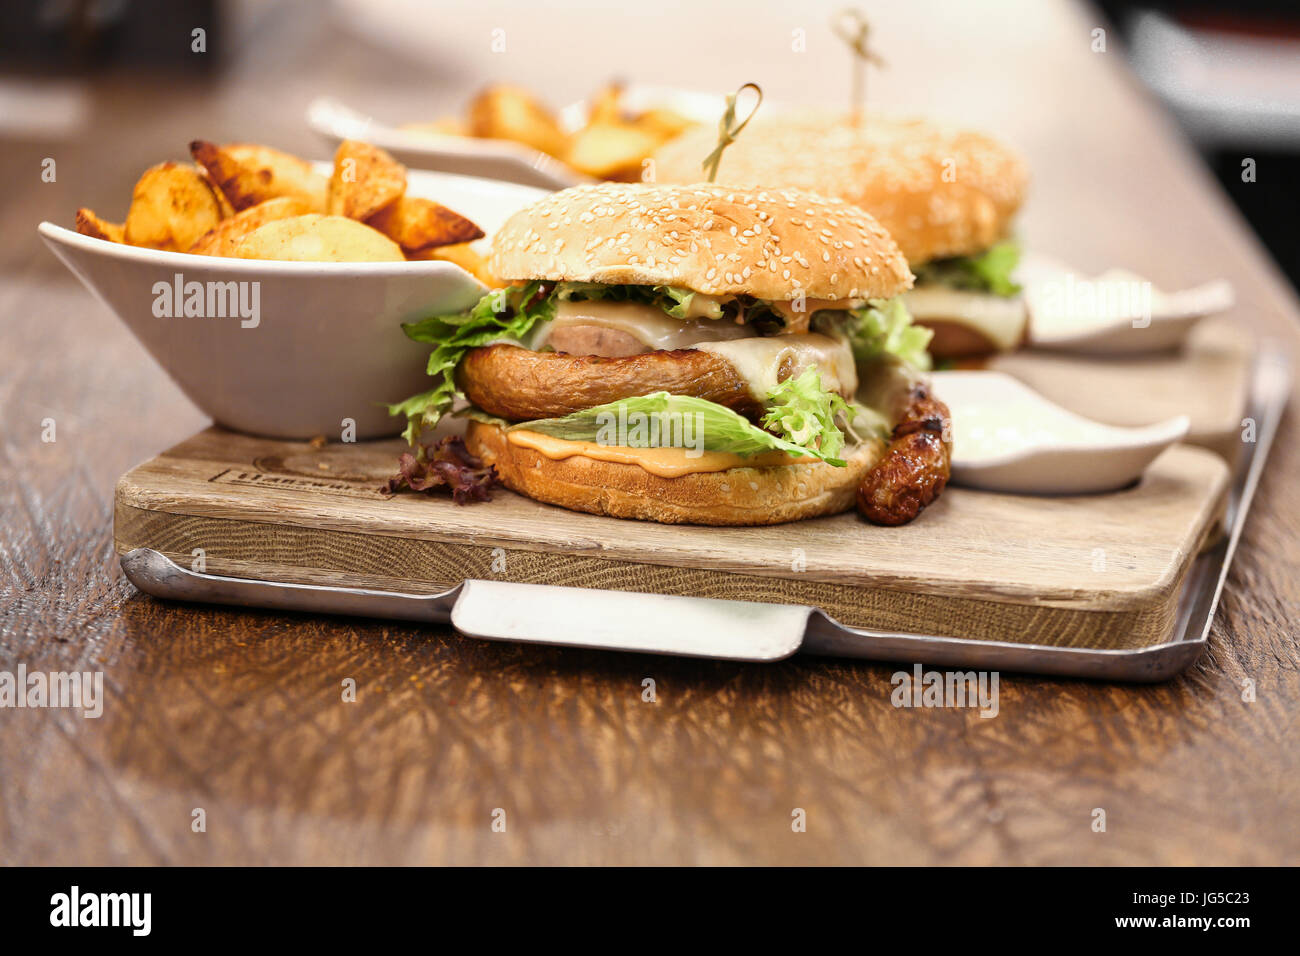 Two delicious wurst burgers served with french fries, Germany Stock Photo